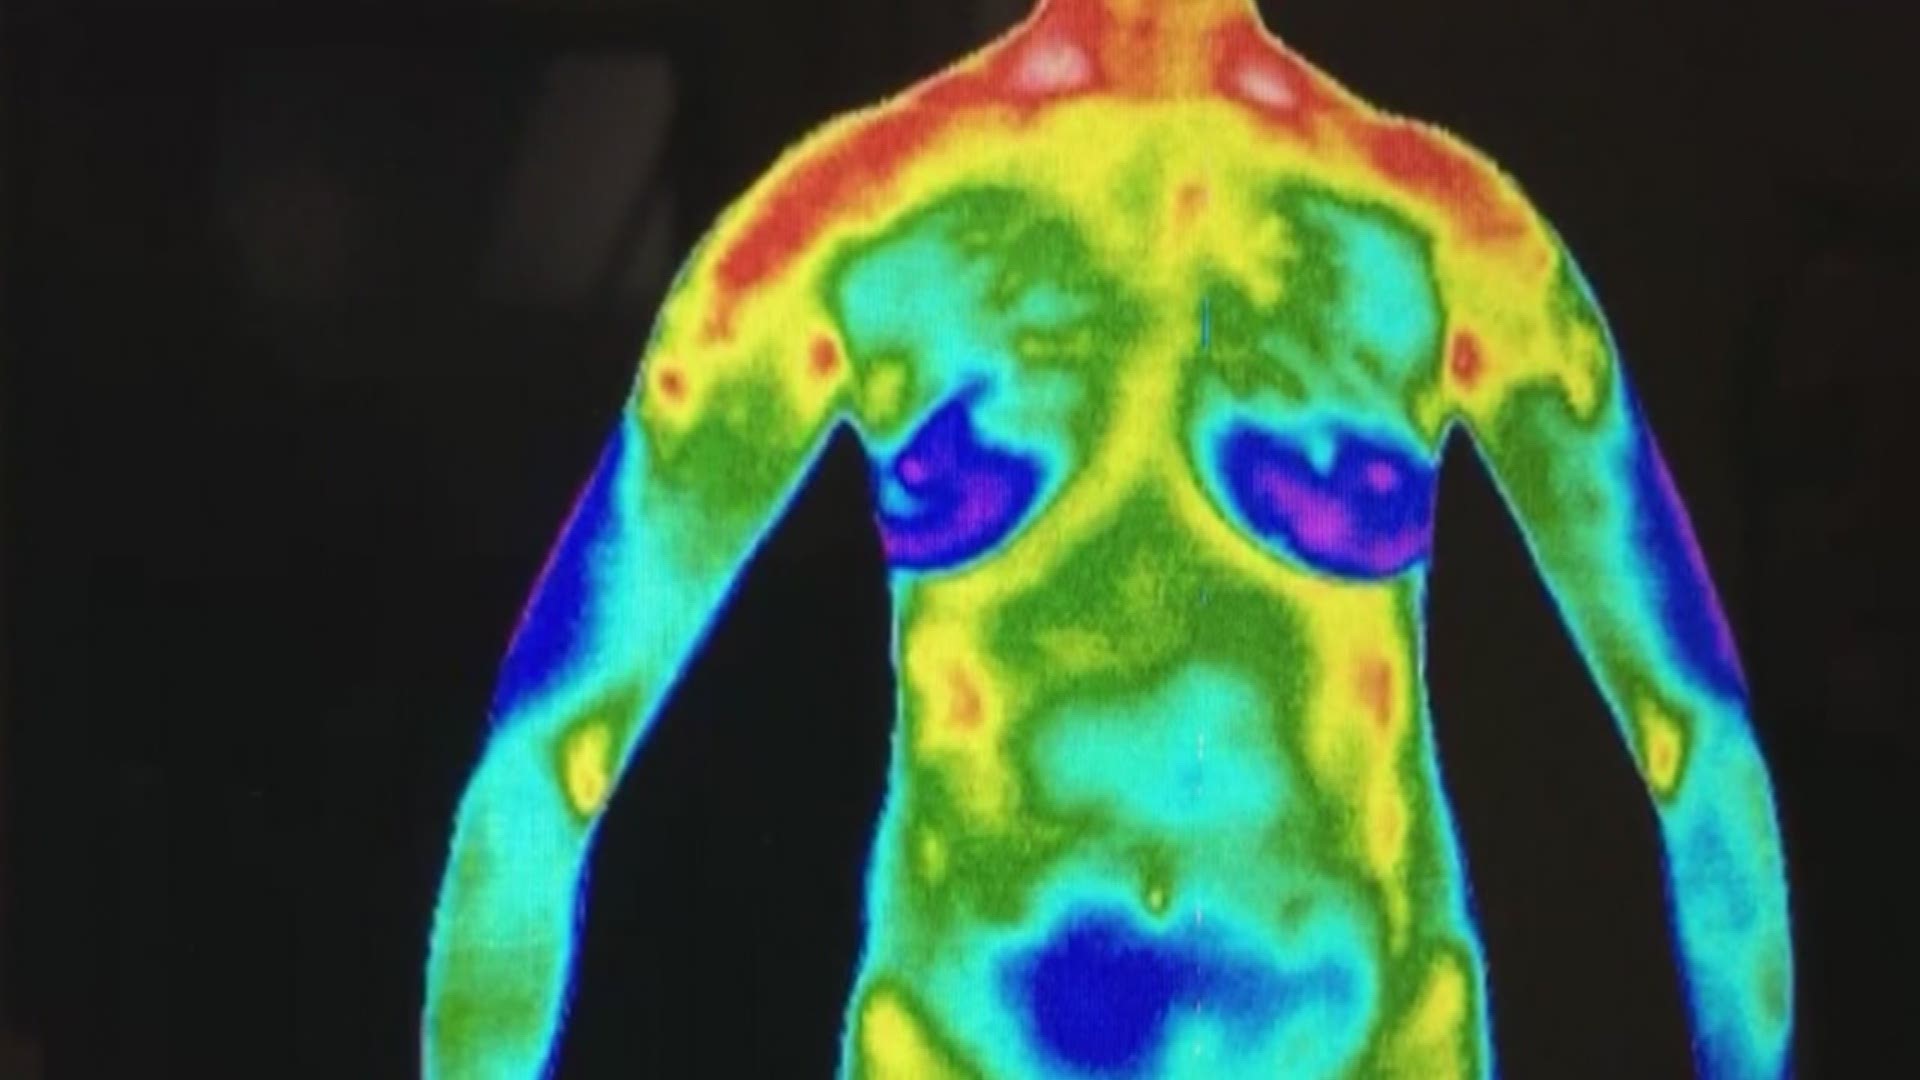 Clinics are touting thermography as a radiation-free way to do breast exams. However, some experts caution they should not take the place of mammograms.